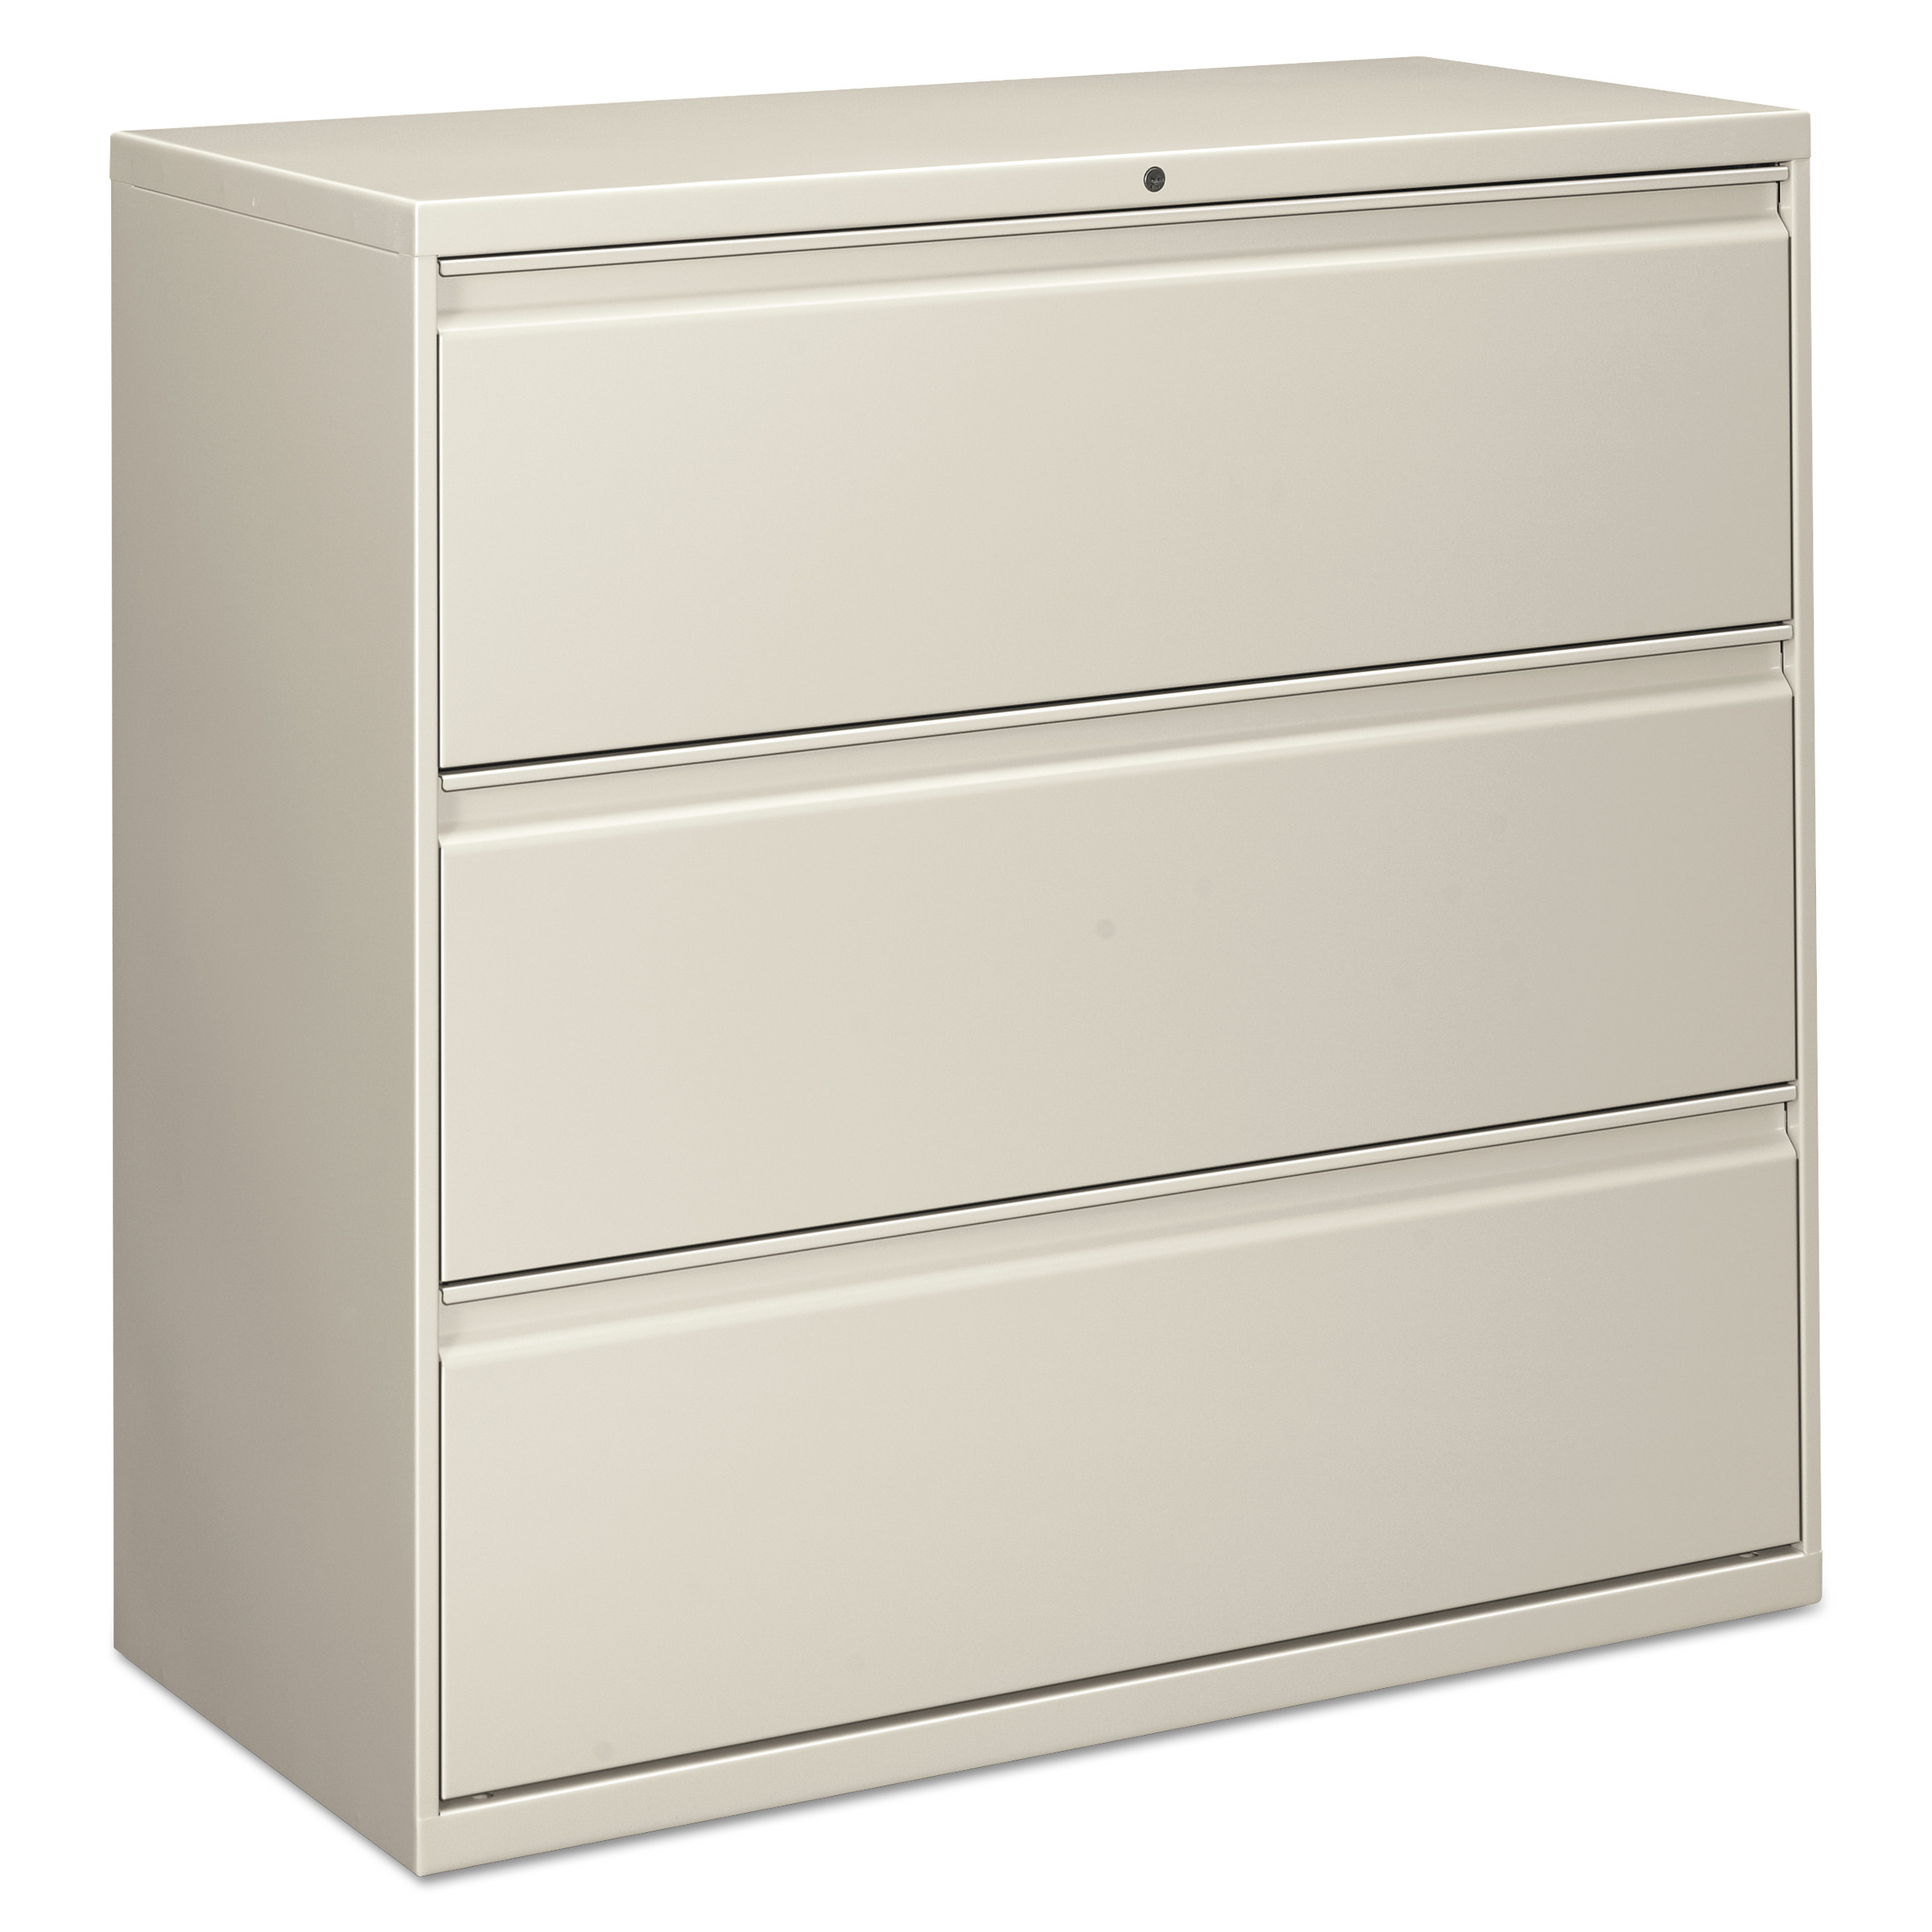 Three-Drawer Lateral File Cabinet, 42w x 18d x 39 1/2h, Light Gray